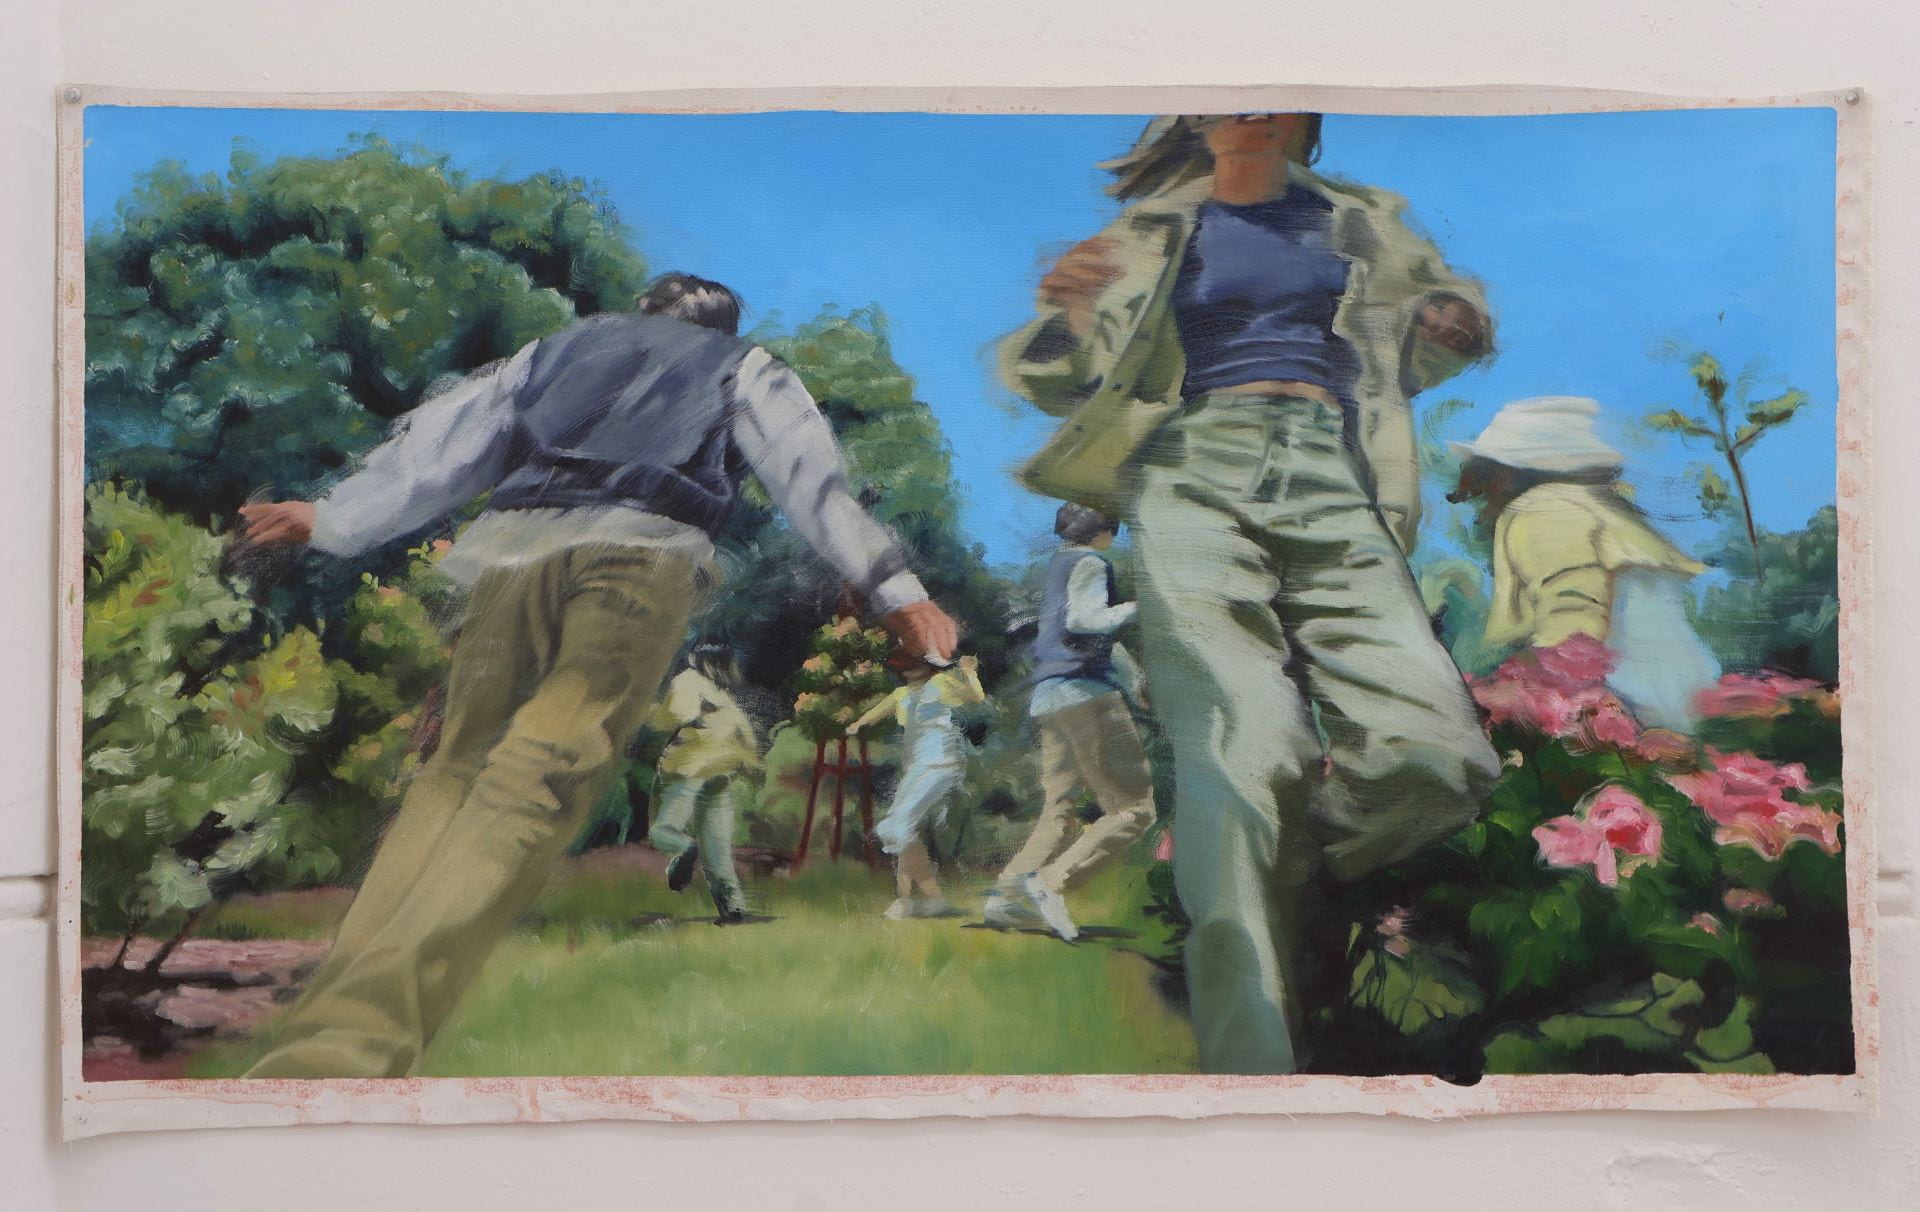 A painting of multiple people running in a garden